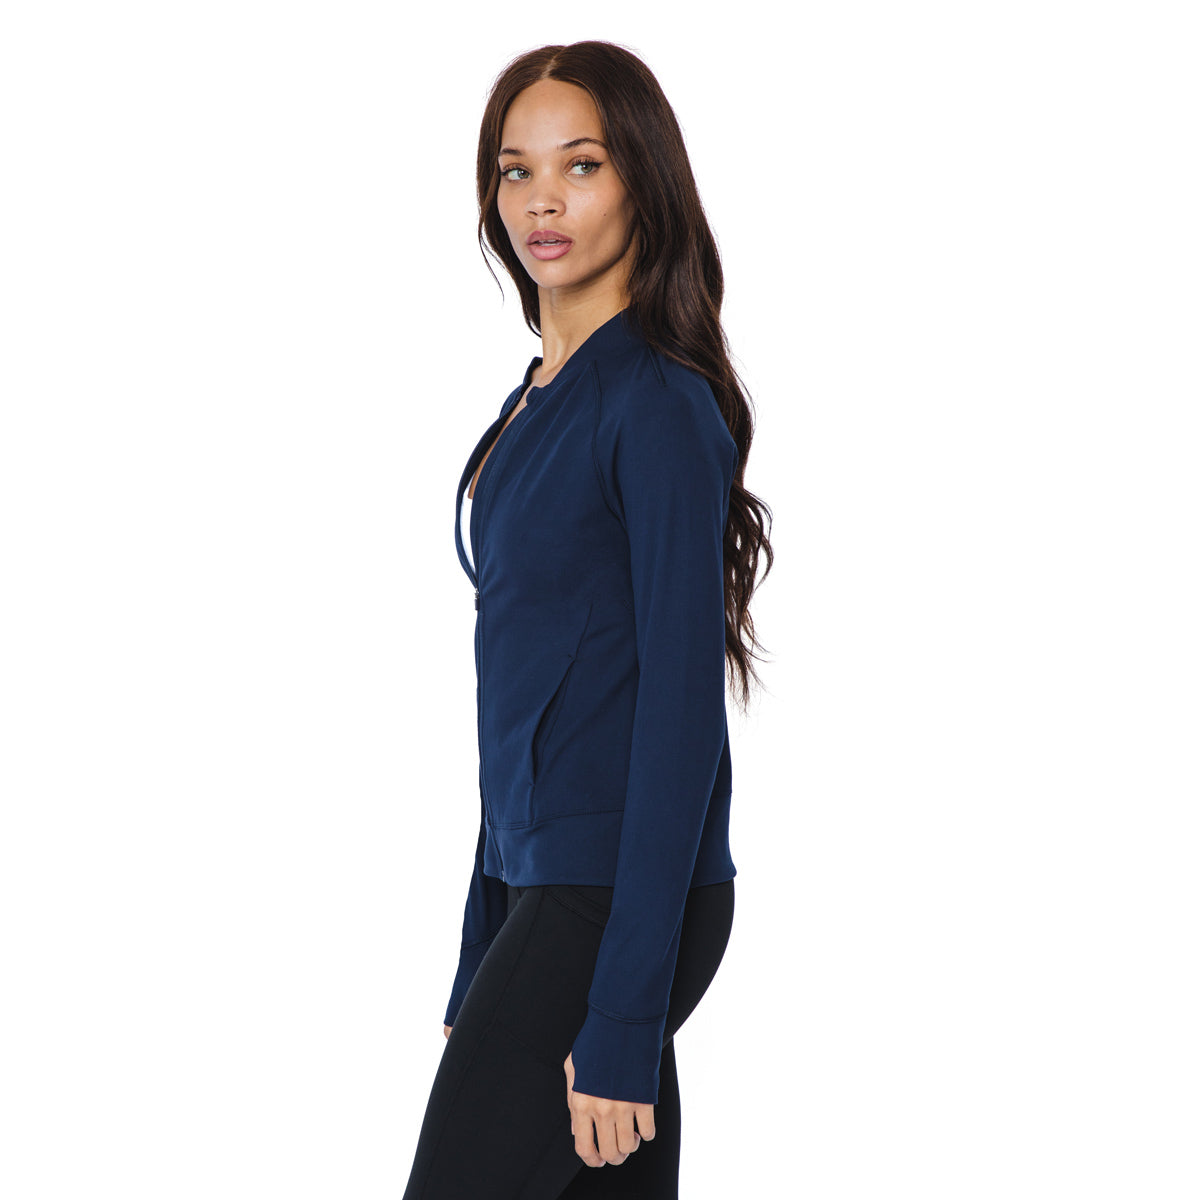 Yogalicious by Reflex Women's Full Zip Cropped Performance Jacket – PROOZY